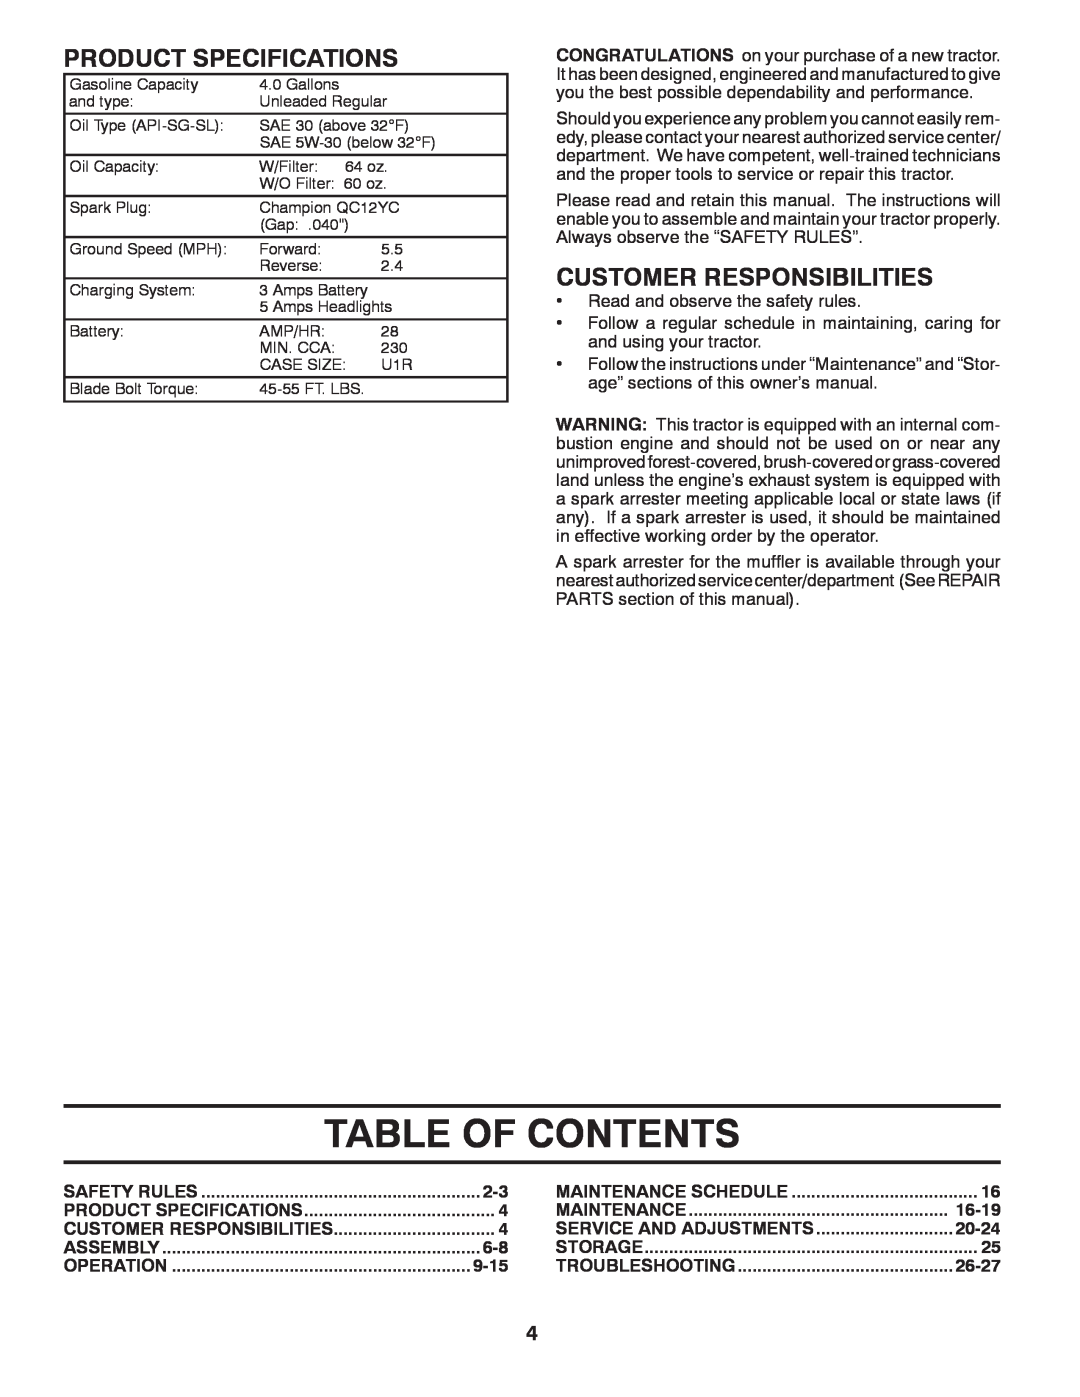 Poulan 532 40 36-87 manual Table Of Contents, Product Specifications, Customer Responsibilities, 9-15, 16-19, 20-24, 26-27 